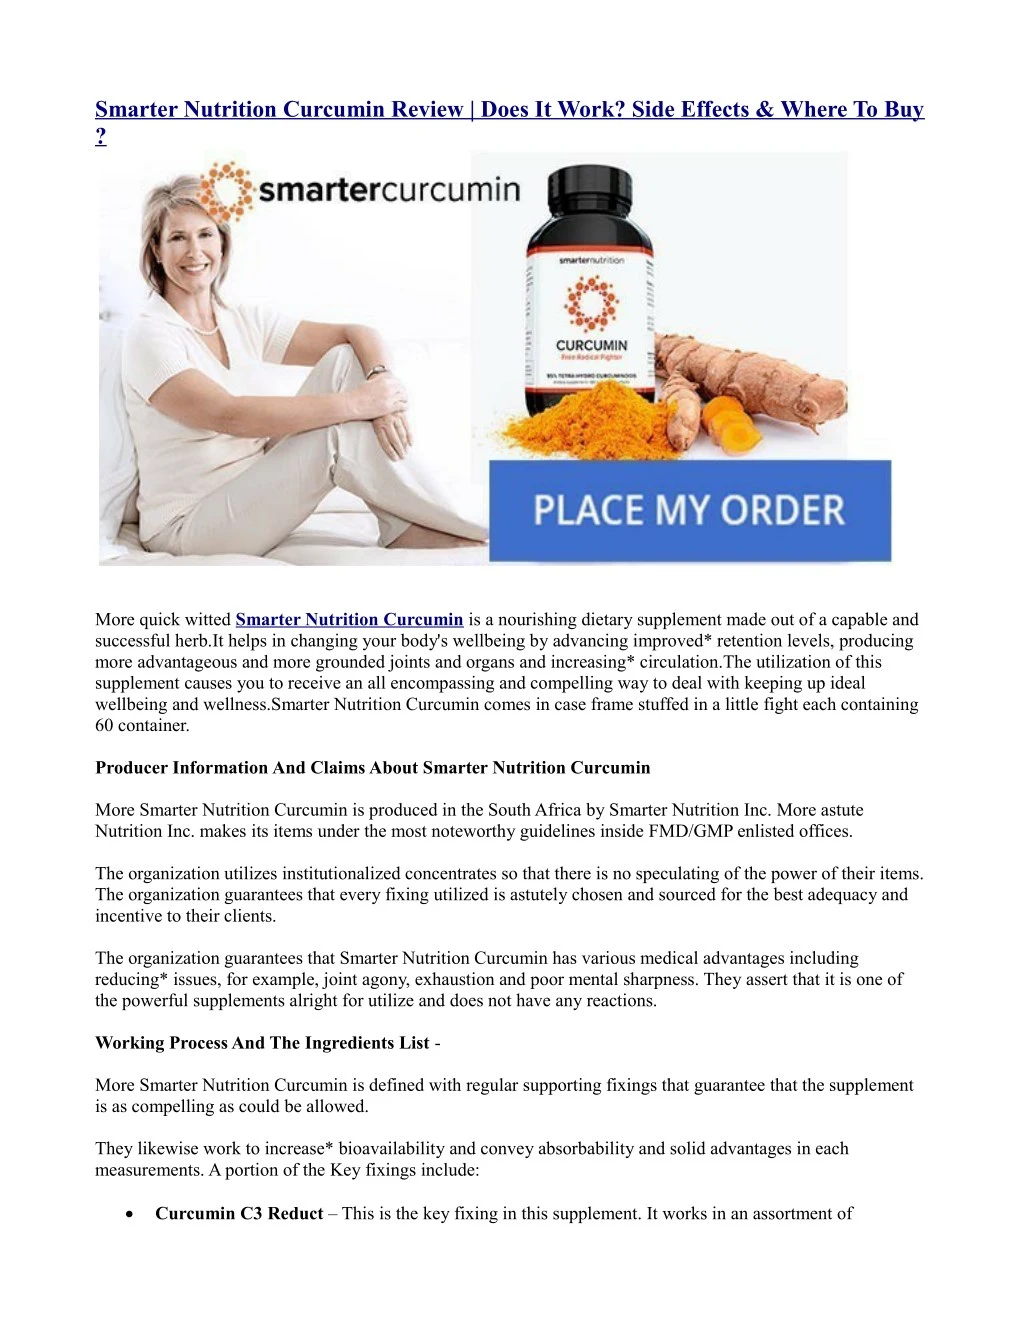 smarter nutrition curcumin review does it work